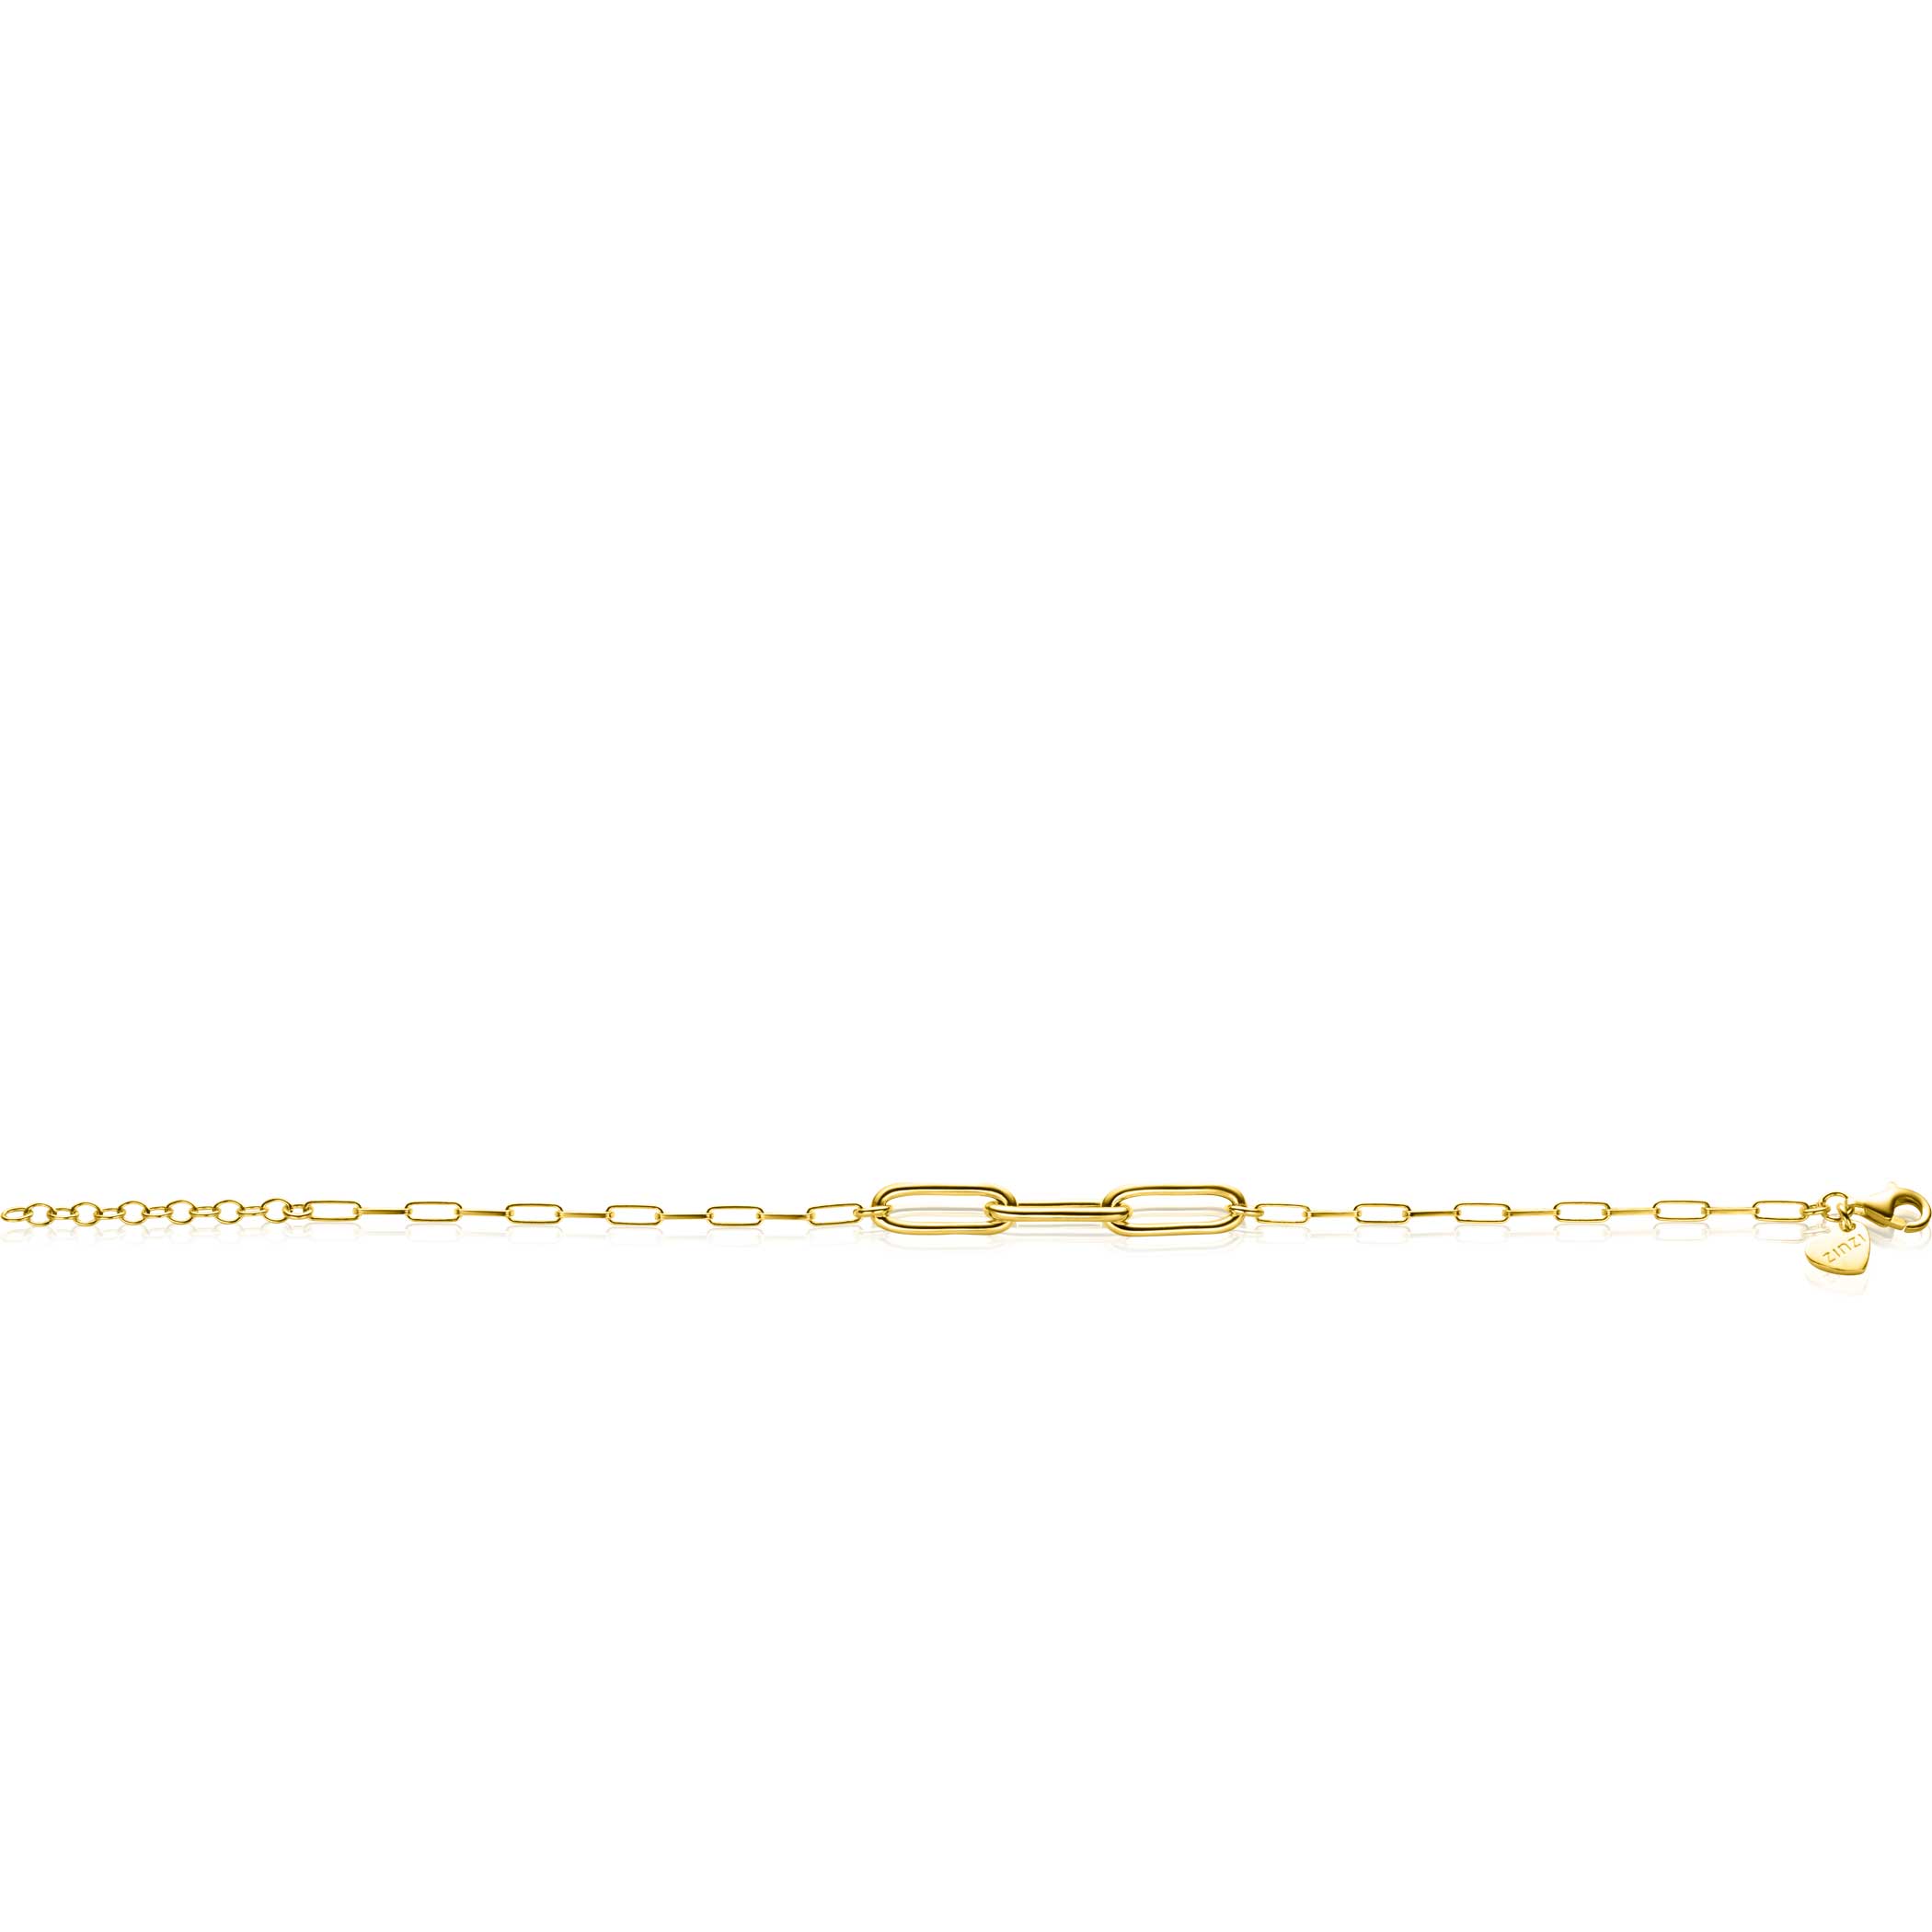 ZINZI Gold Plated Sterling Silver Chain Bracelet with 3 Large Oval Chains 16,5-19,5cm ZIA2522